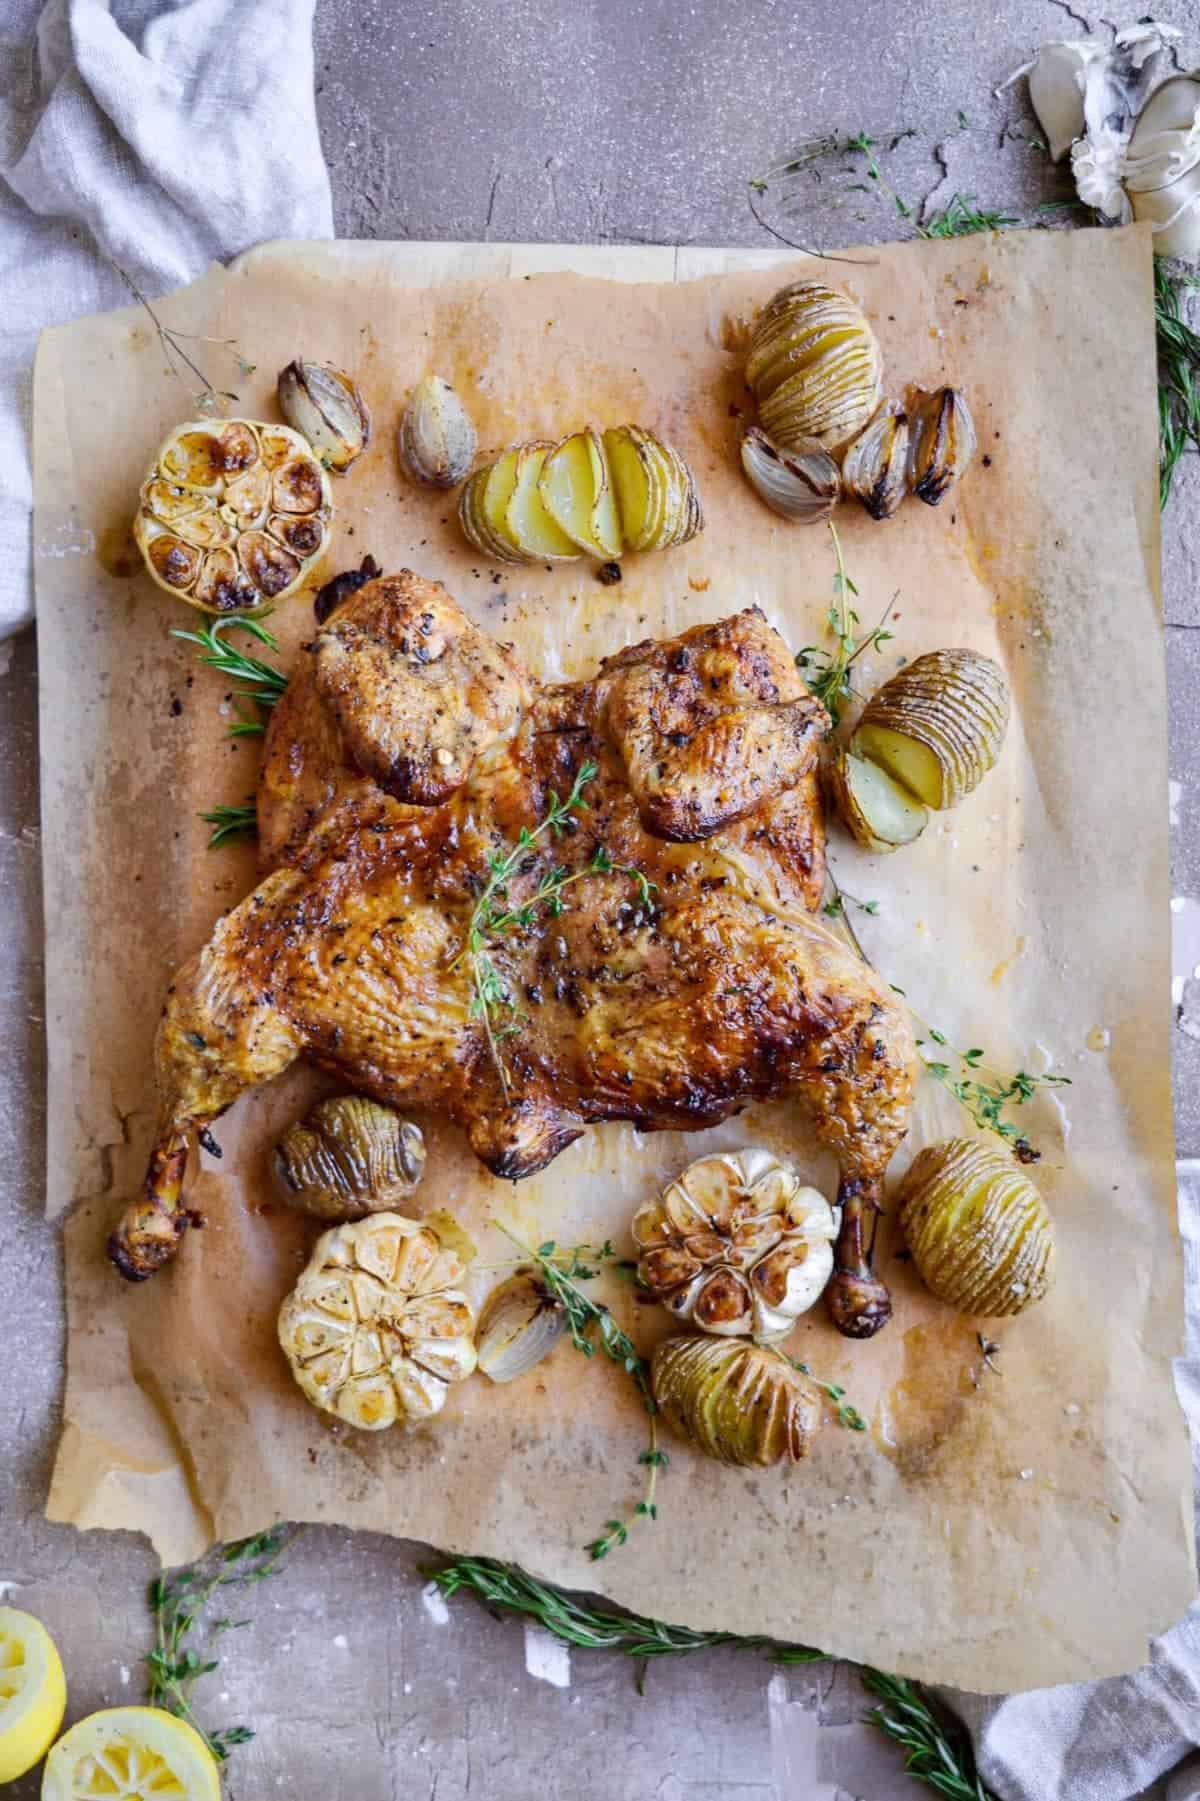 A roasted chicken on parchment